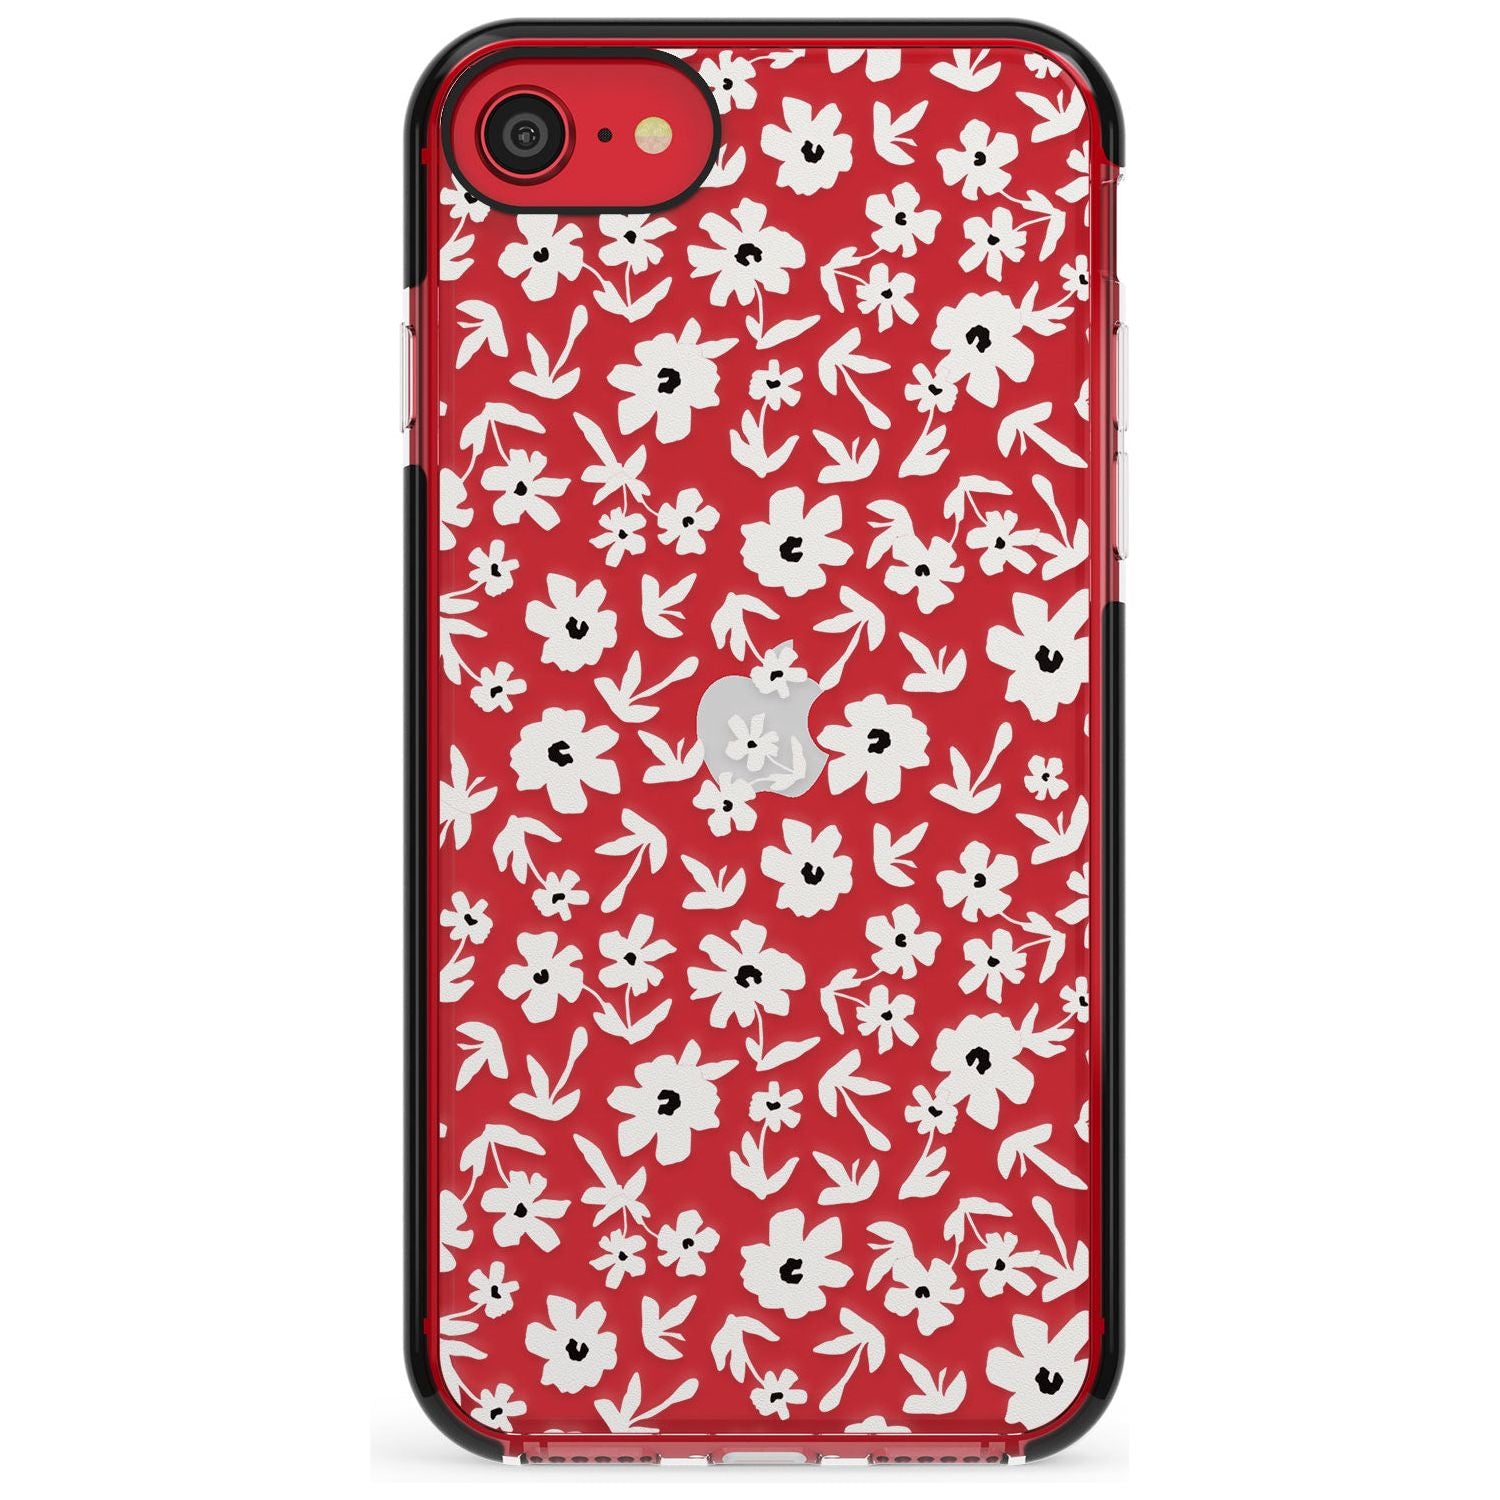 Floral Print on Clear - Cute Floral Design Pink Fade Impact Phone Case for iPhone SE 8 7 Plus